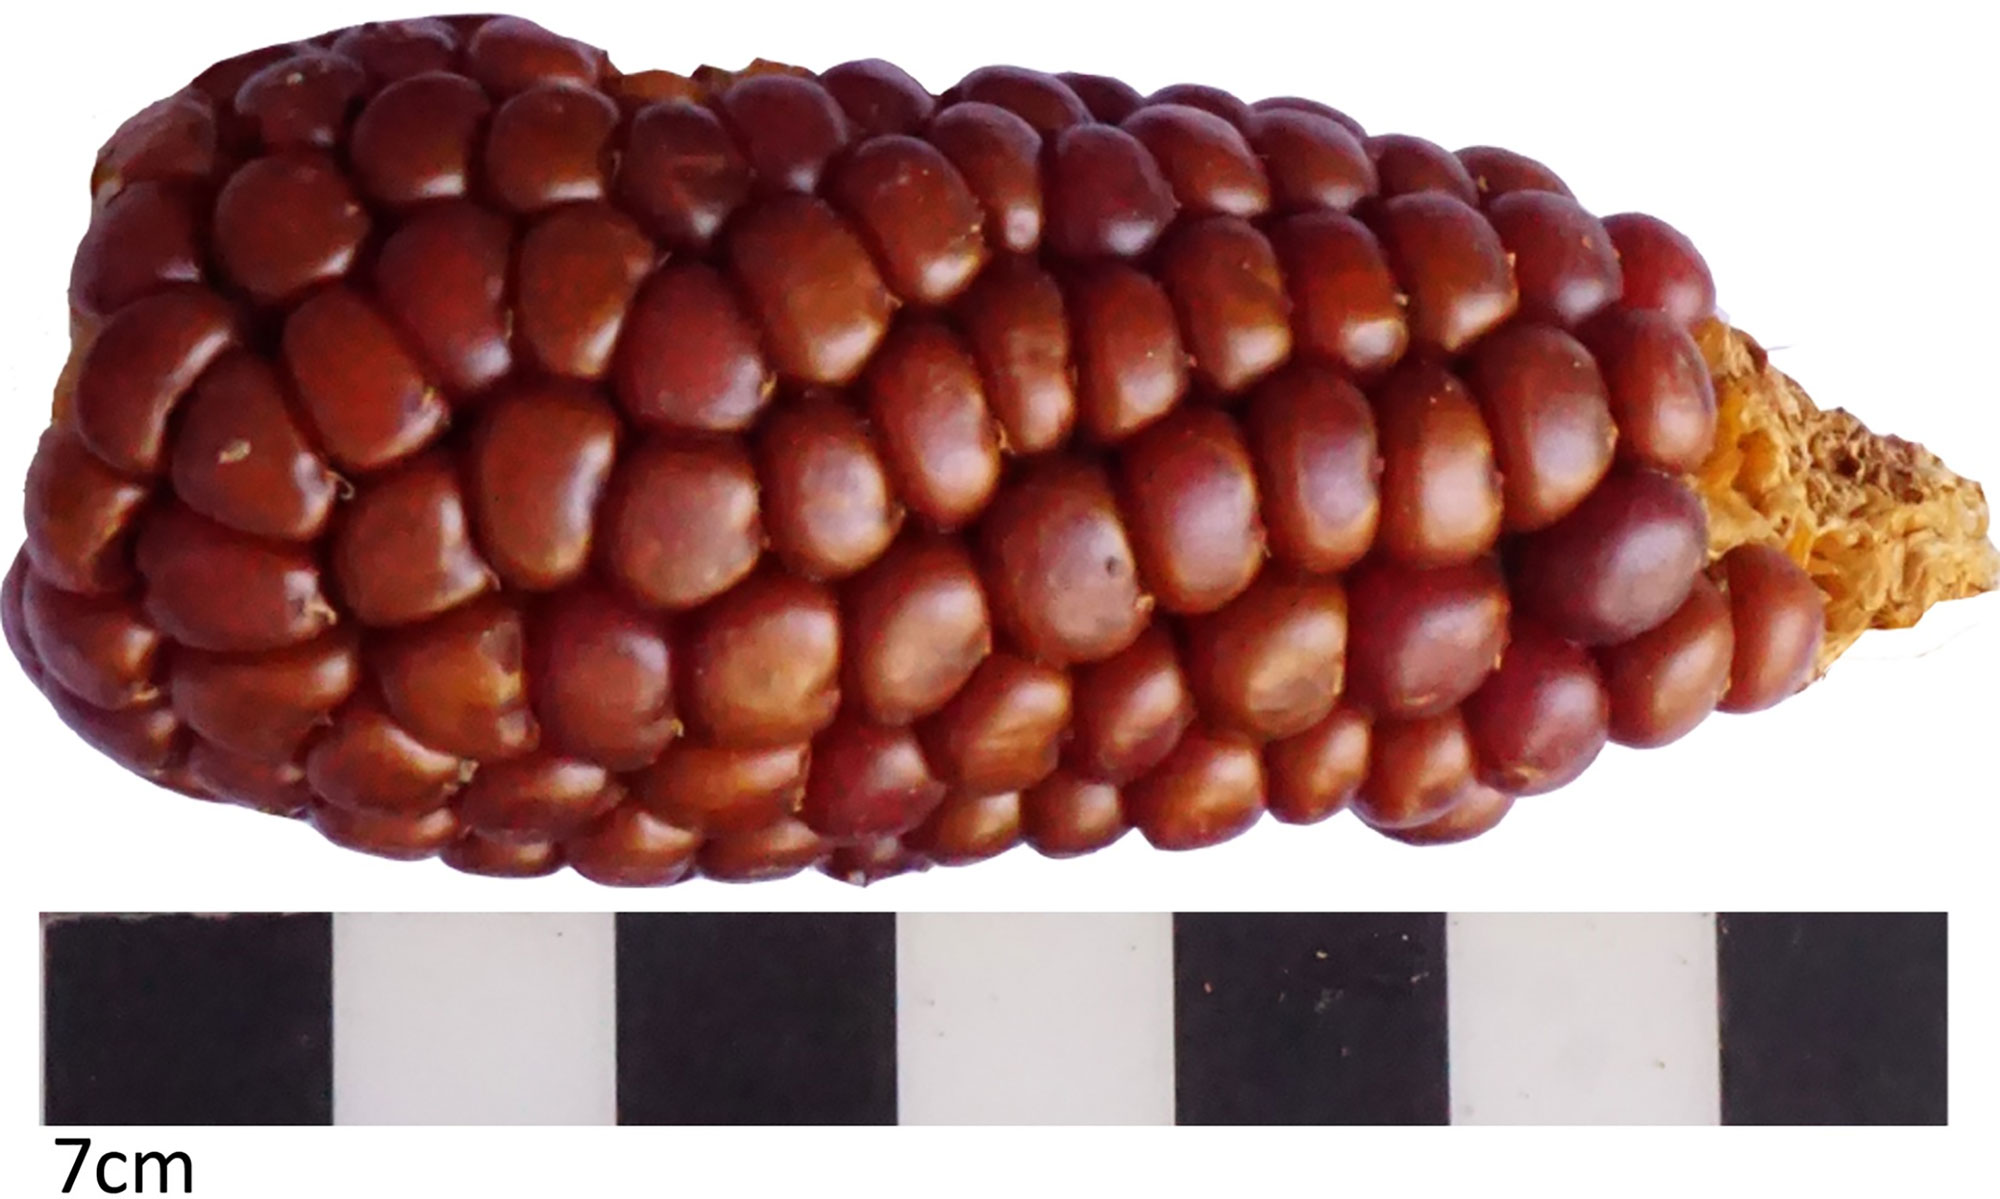 Photograph of an ear of popcorn from the Atacama Desert in northern Chile. The photo shows an ear of maize with brown kernels. The ear is about 7 centimeters long.